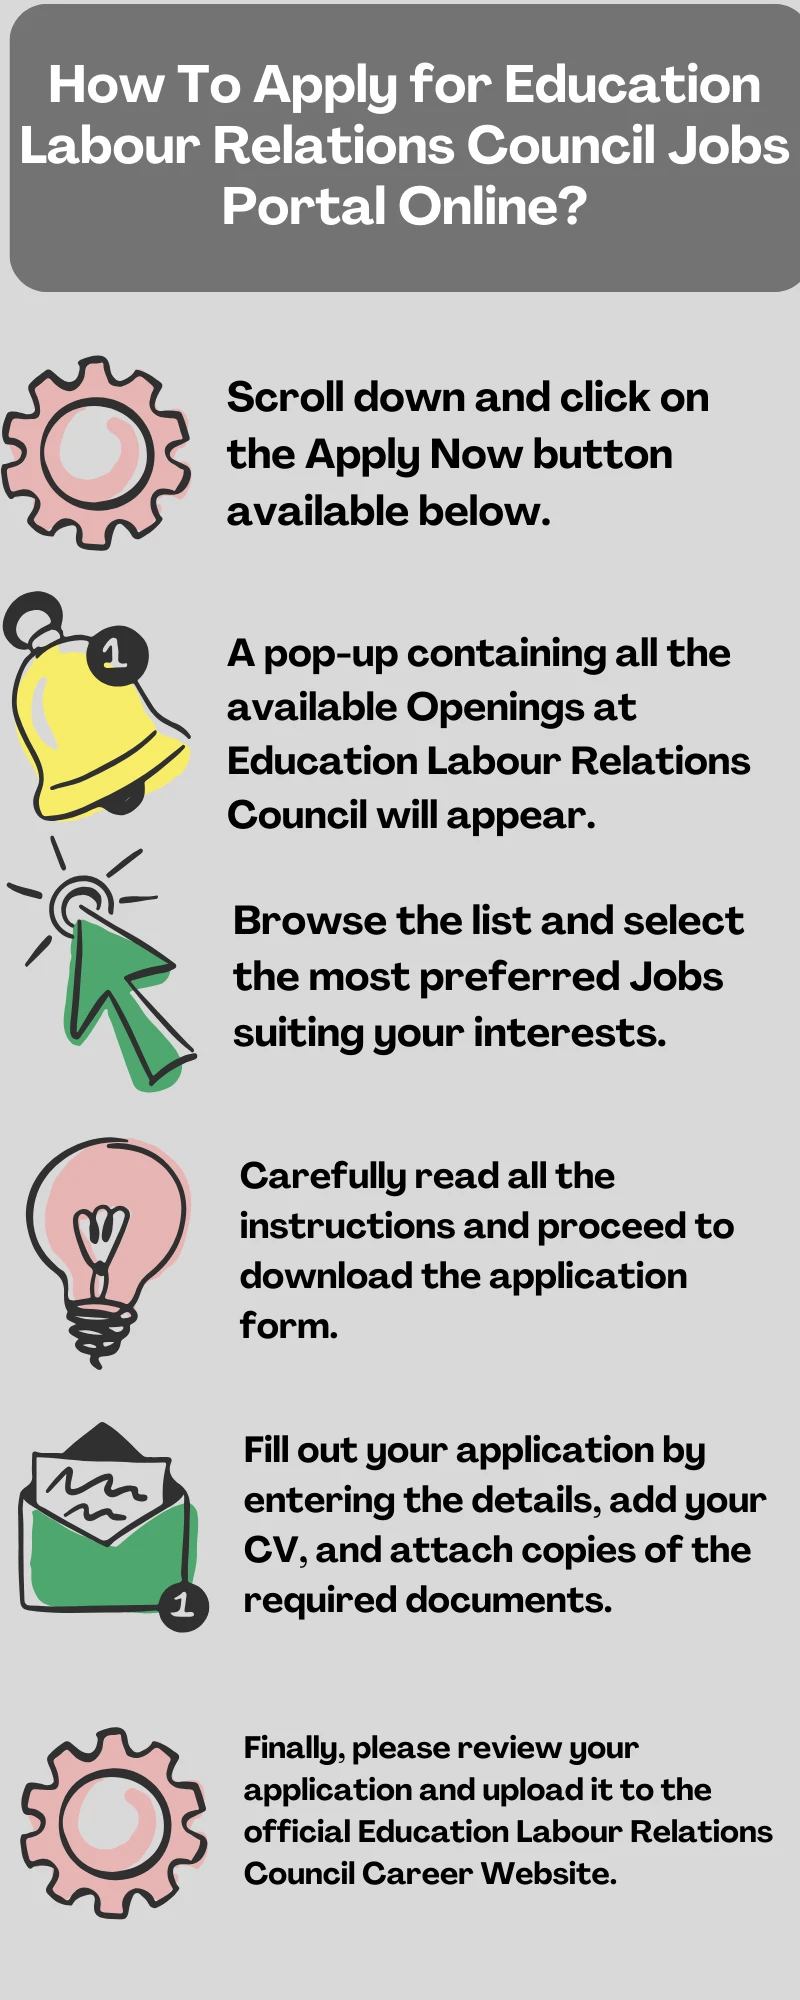 How To Apply for Education Labour Relations Council Jobs Portal Online?